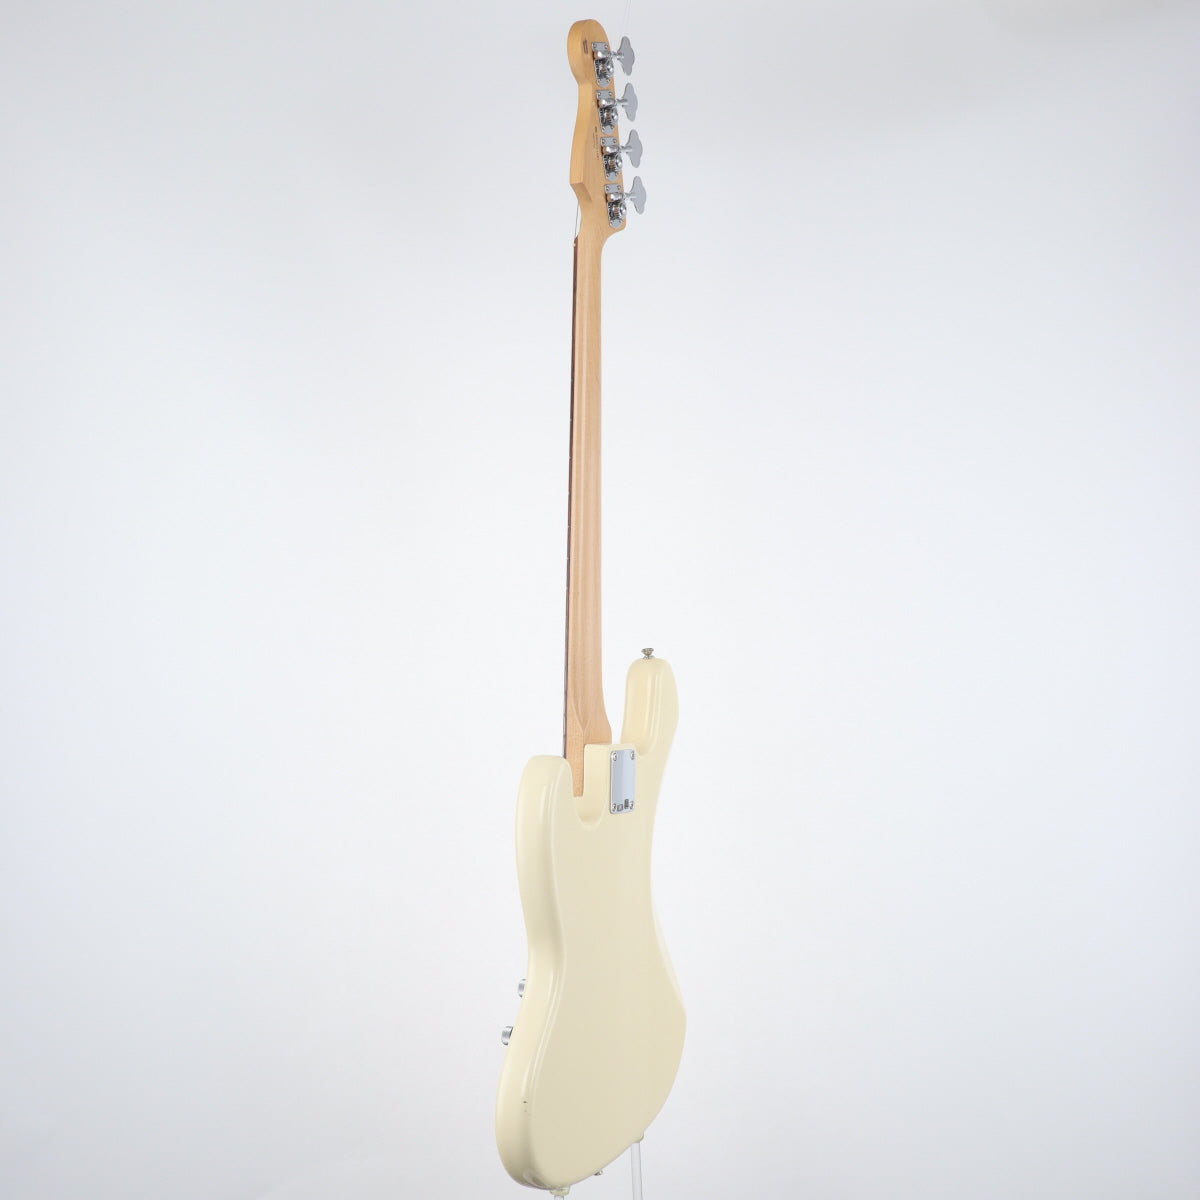 [SN US10128191] USED Fender USA / American Special Jazz Bass MOD Olympic White [11]